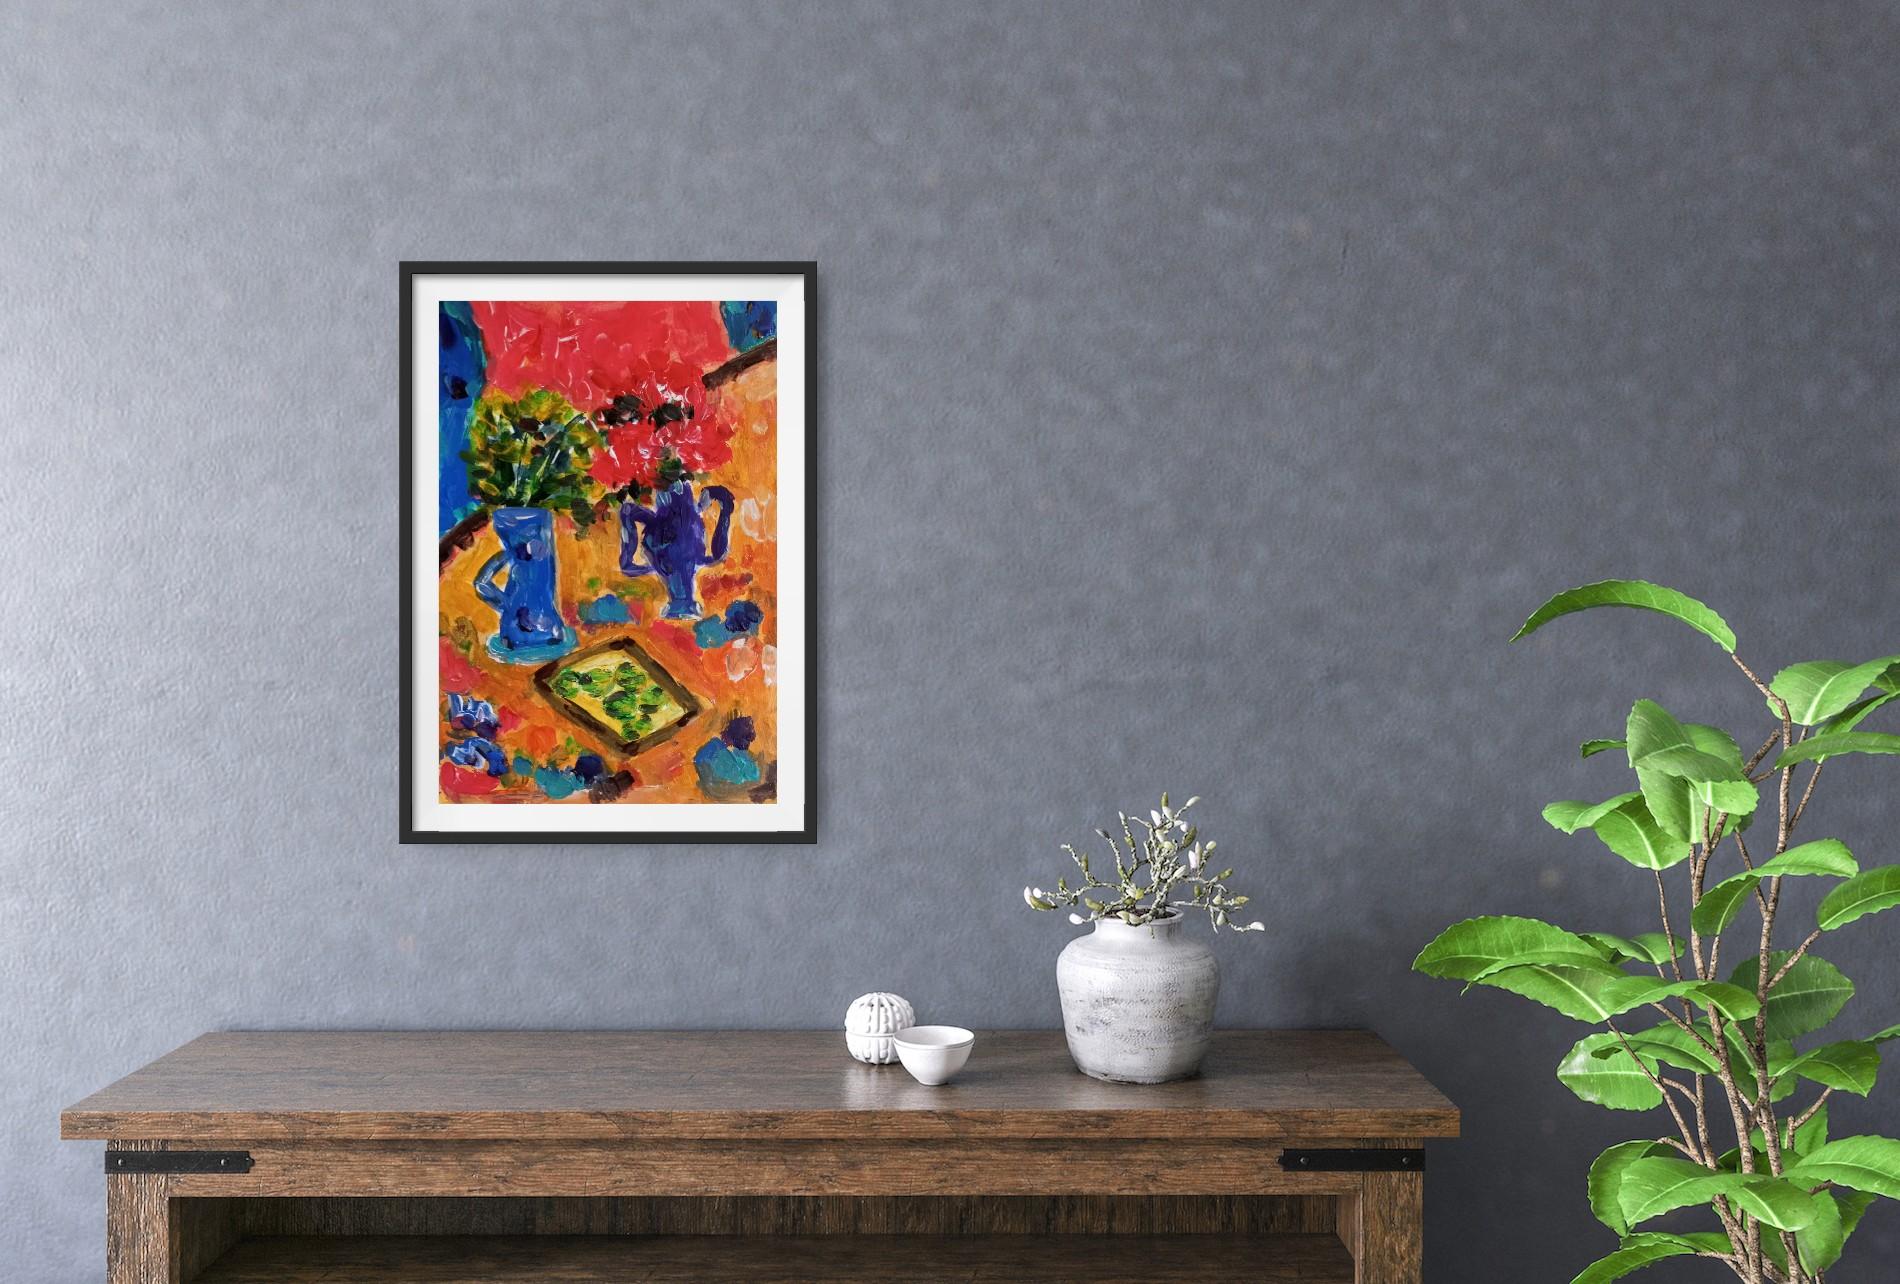 
In this abstract floral artwork I experience the world of nature through the bright colors of a summer period.

While painting, I sought to capture the beauty of summer flowers and summer fruits which are full of different colors.

In my art